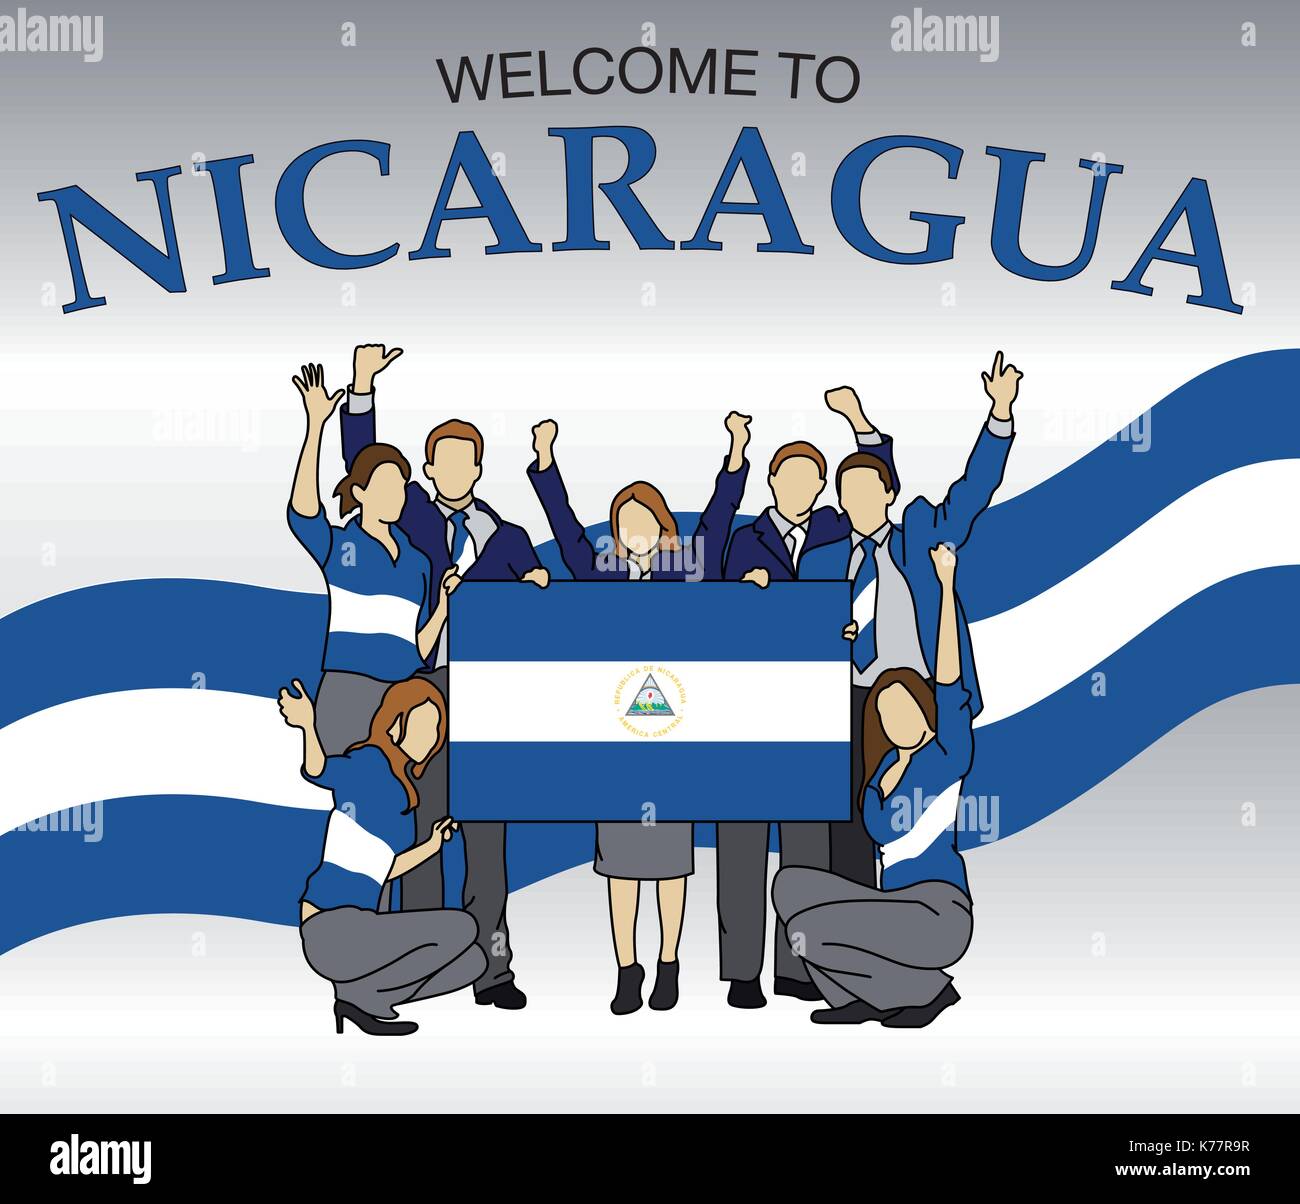 Welcome to Nicaragua. Group of people dressed in the colors of the Nicaragua flag, waving with hands and holding the flag - Vector image Stock Vector